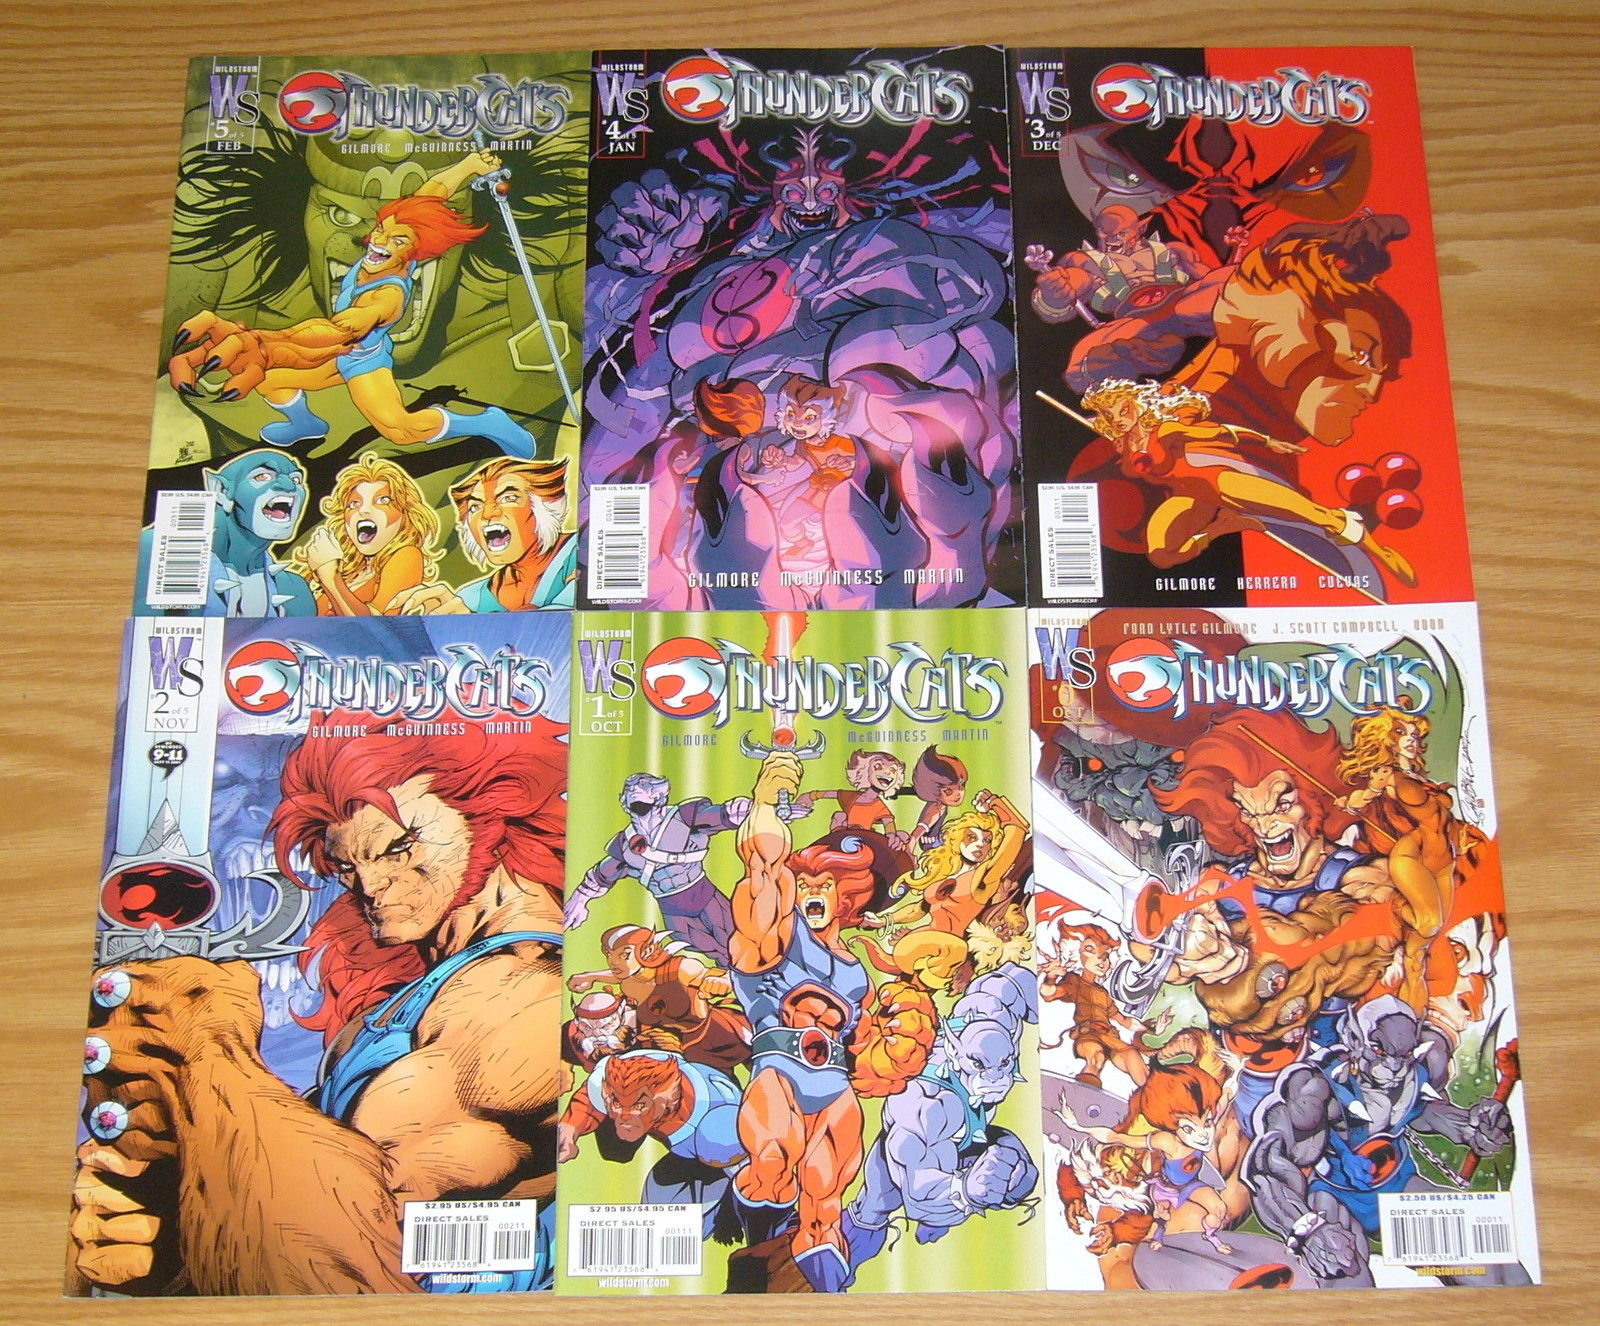 Thundercats 0 & 15 VF/NM complete series ALL A VARIANTS wildstorm set